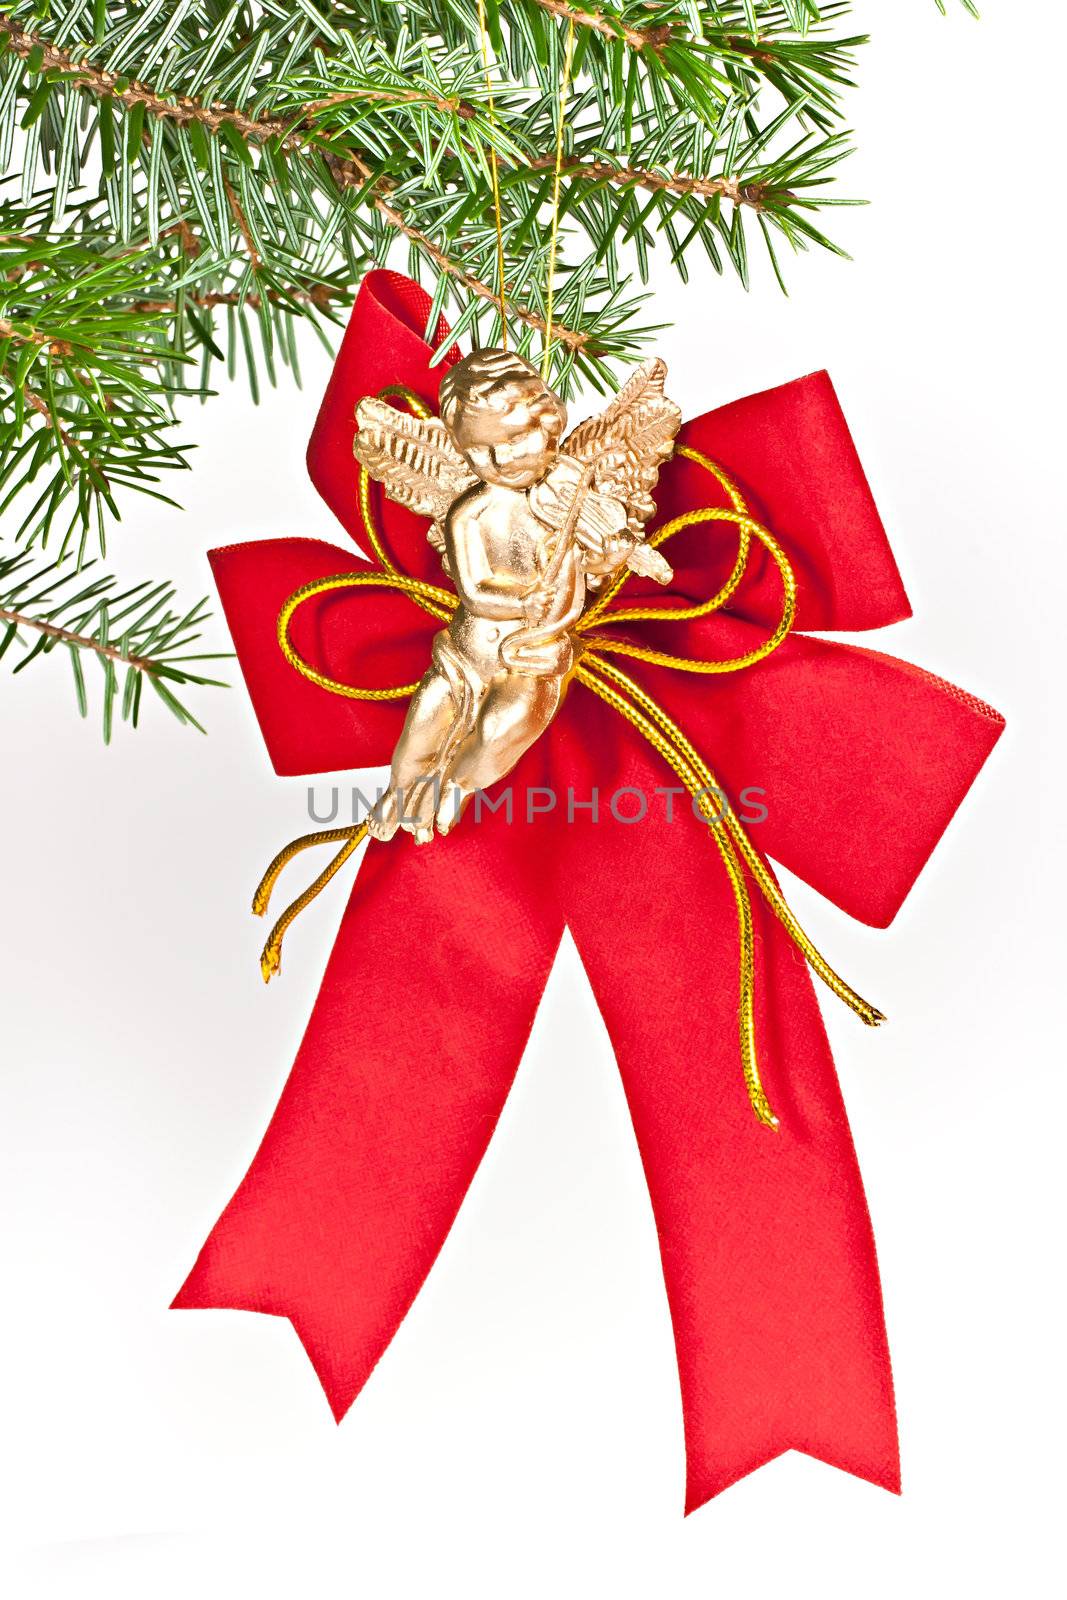 Christmas decoration angel on spruce branch. Isolated on a white background.

